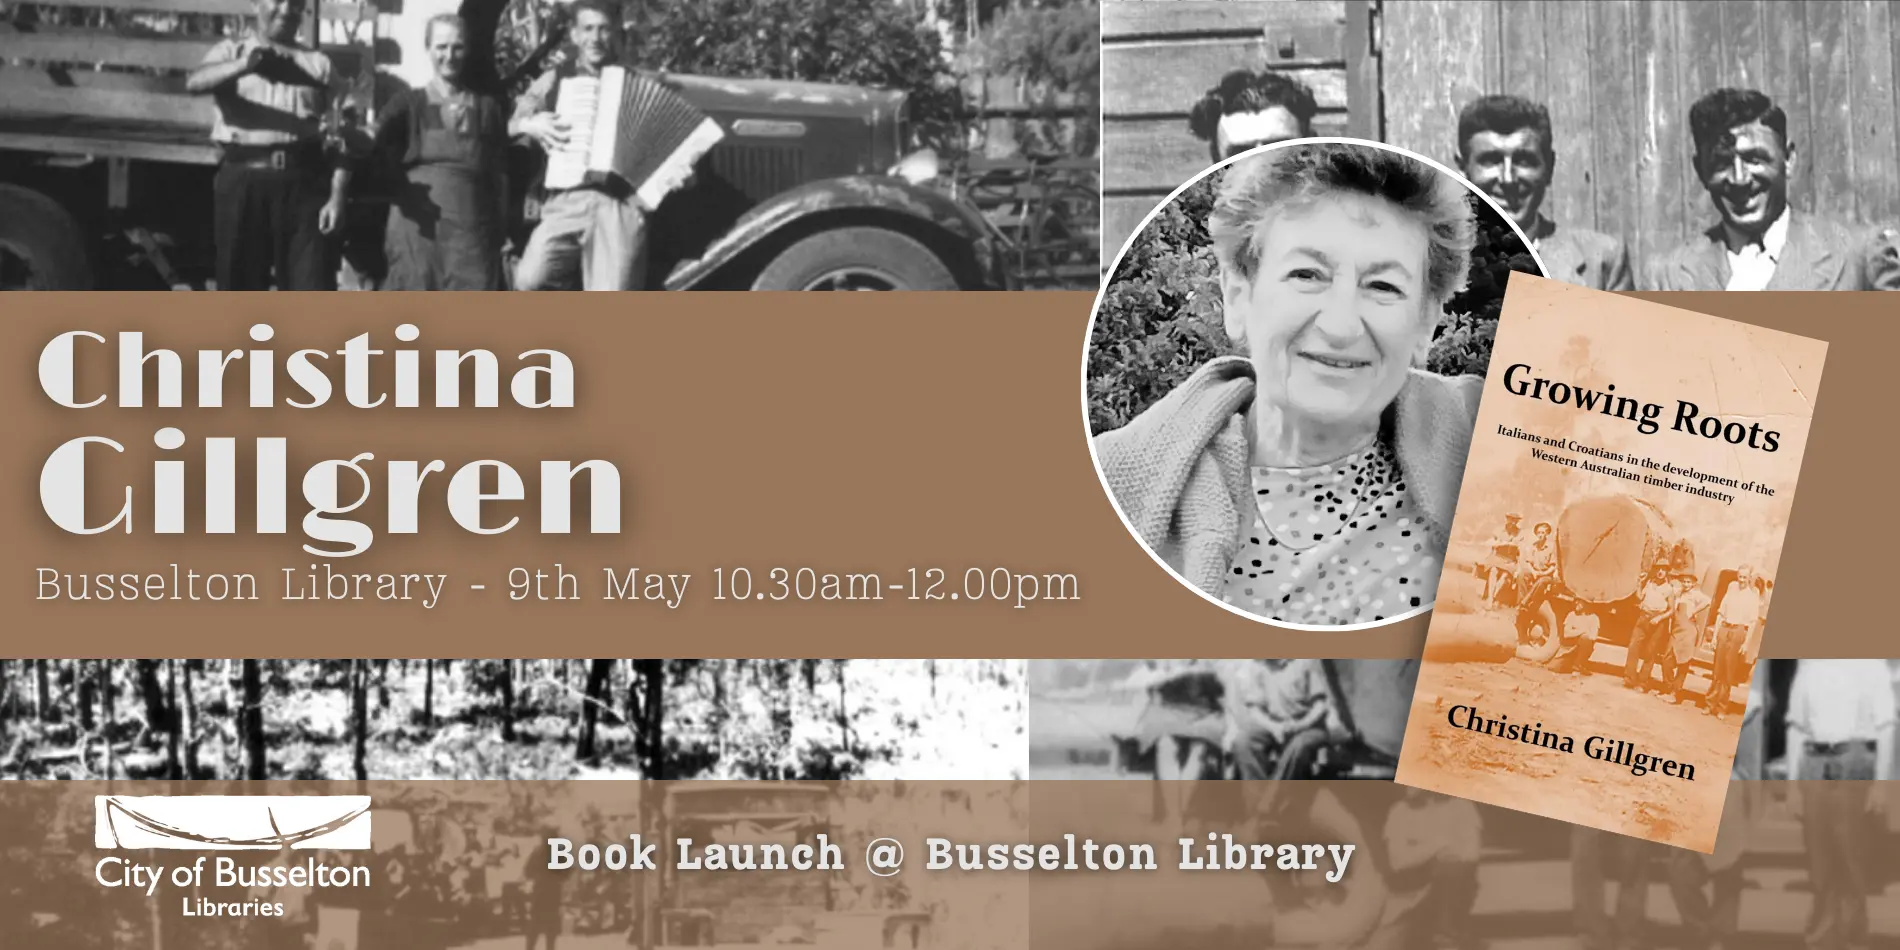 Christina Gillgren Book Launch Event at the Busselton Library on the 9th of May at 10.30pm